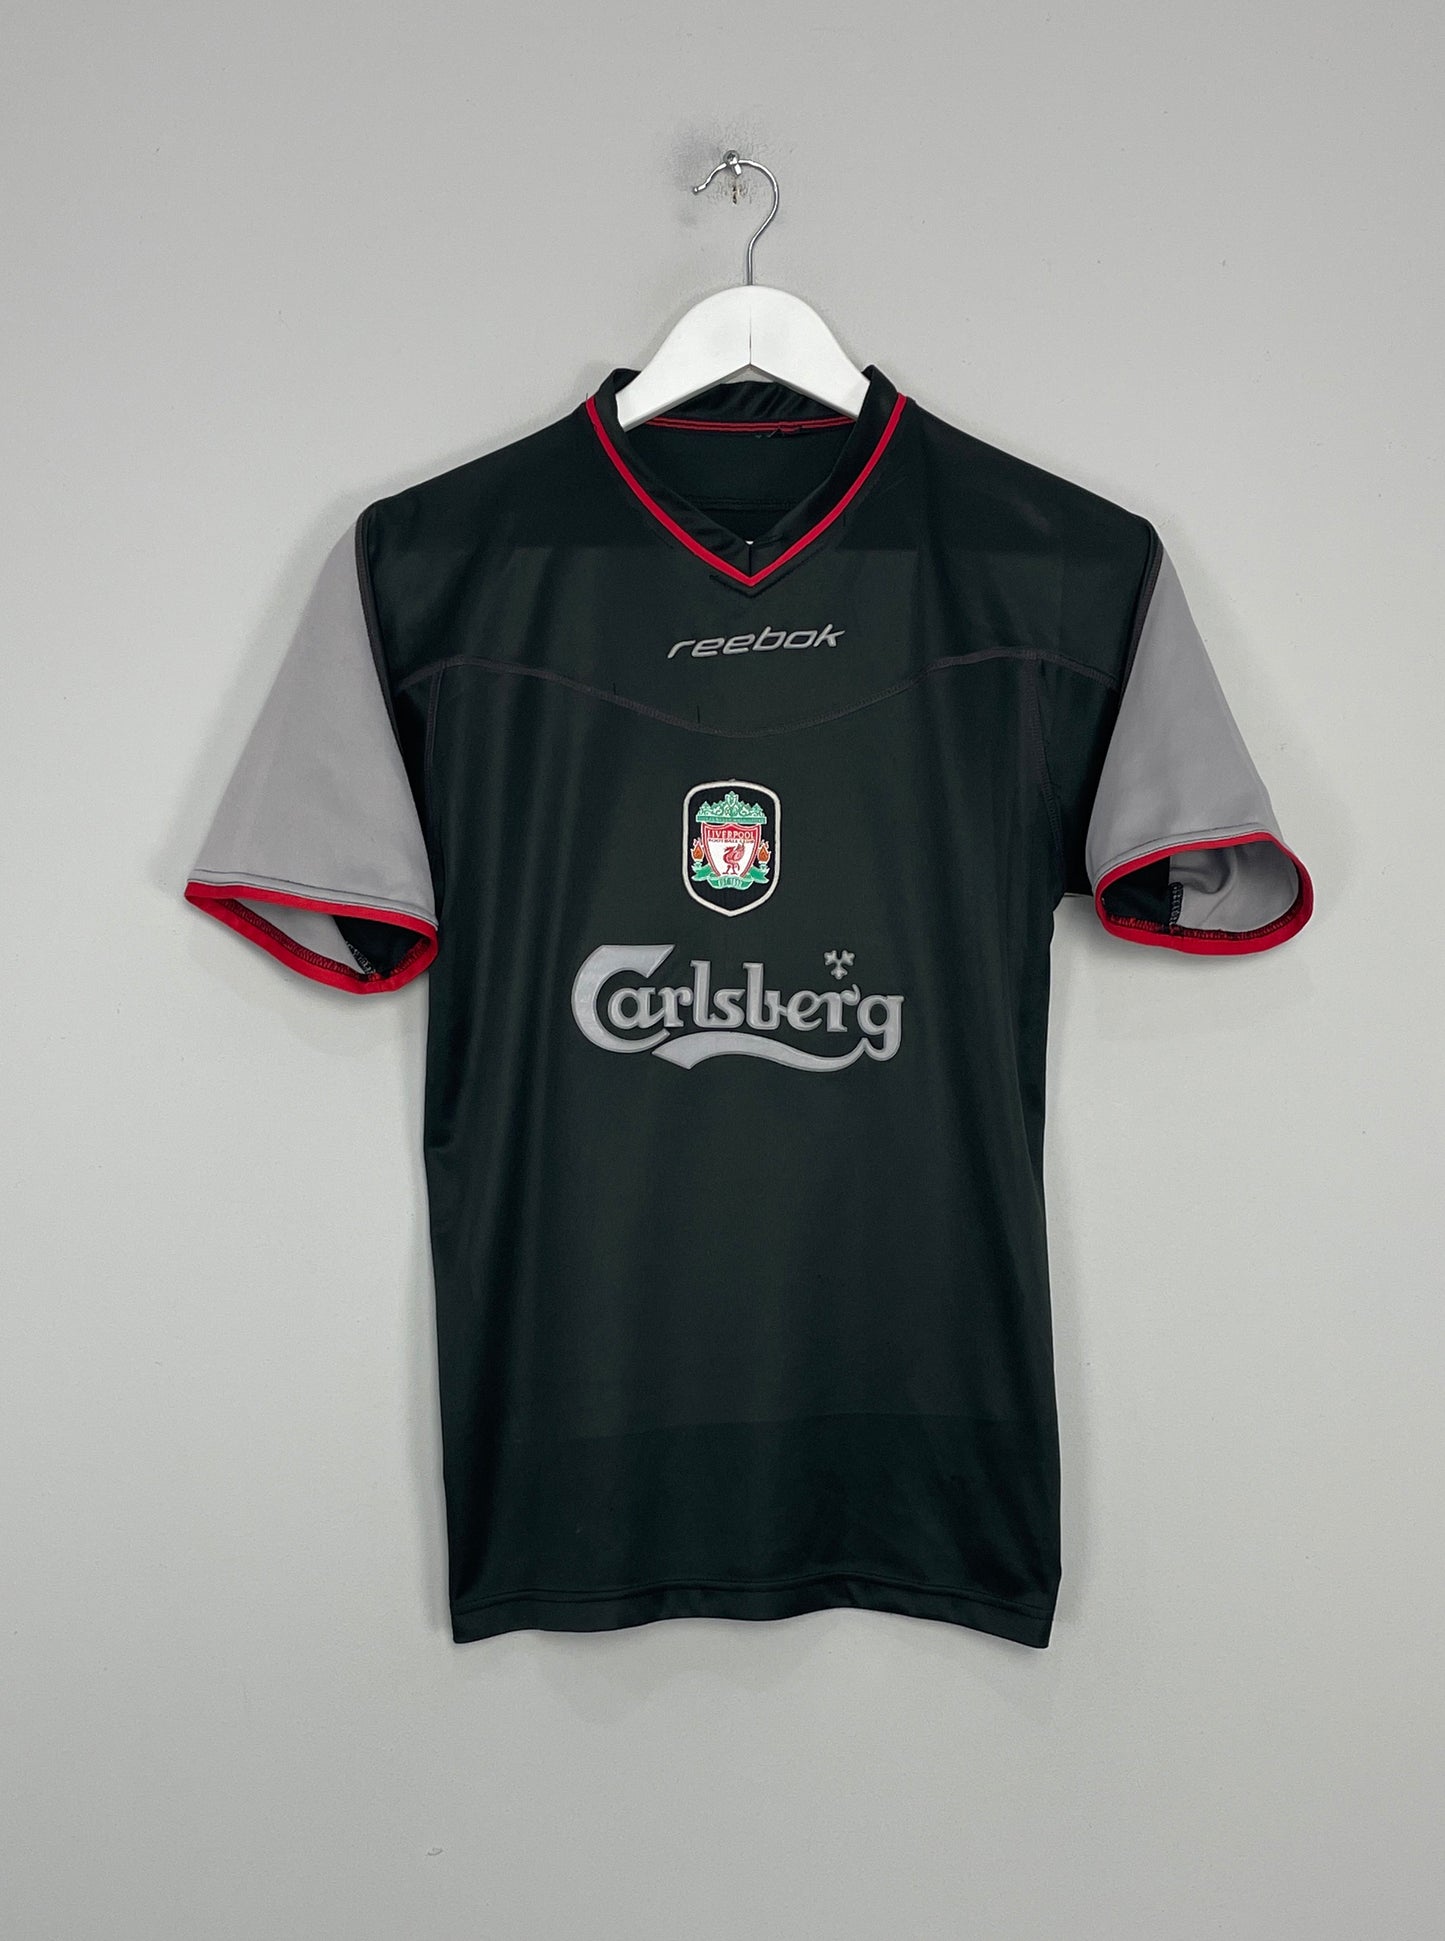 Image of the Liverpool shirt from the 2003/04 season